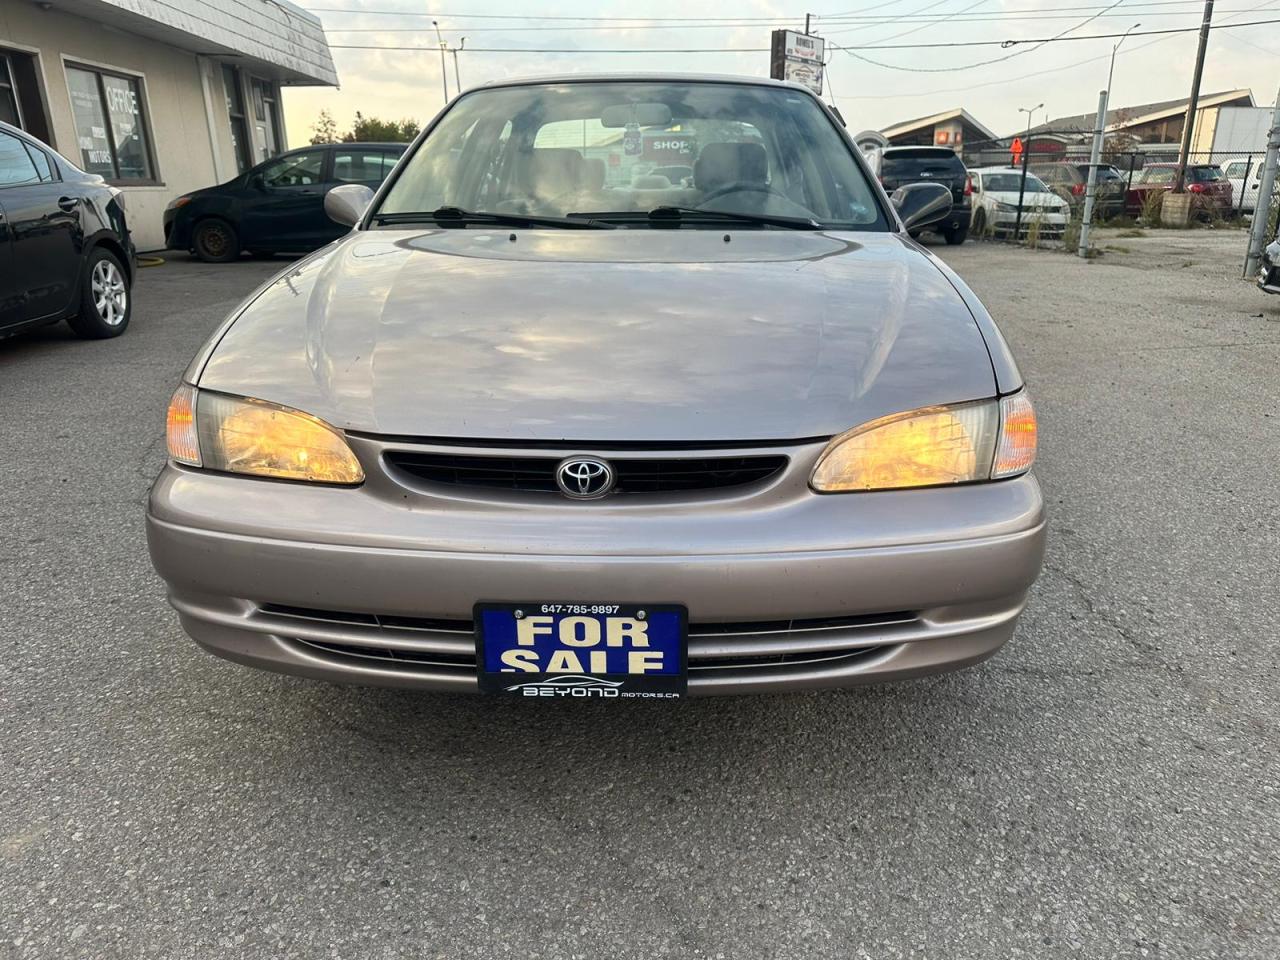 2000 Toyota Corolla LE certified with 3 years warranty included. - Photo #1